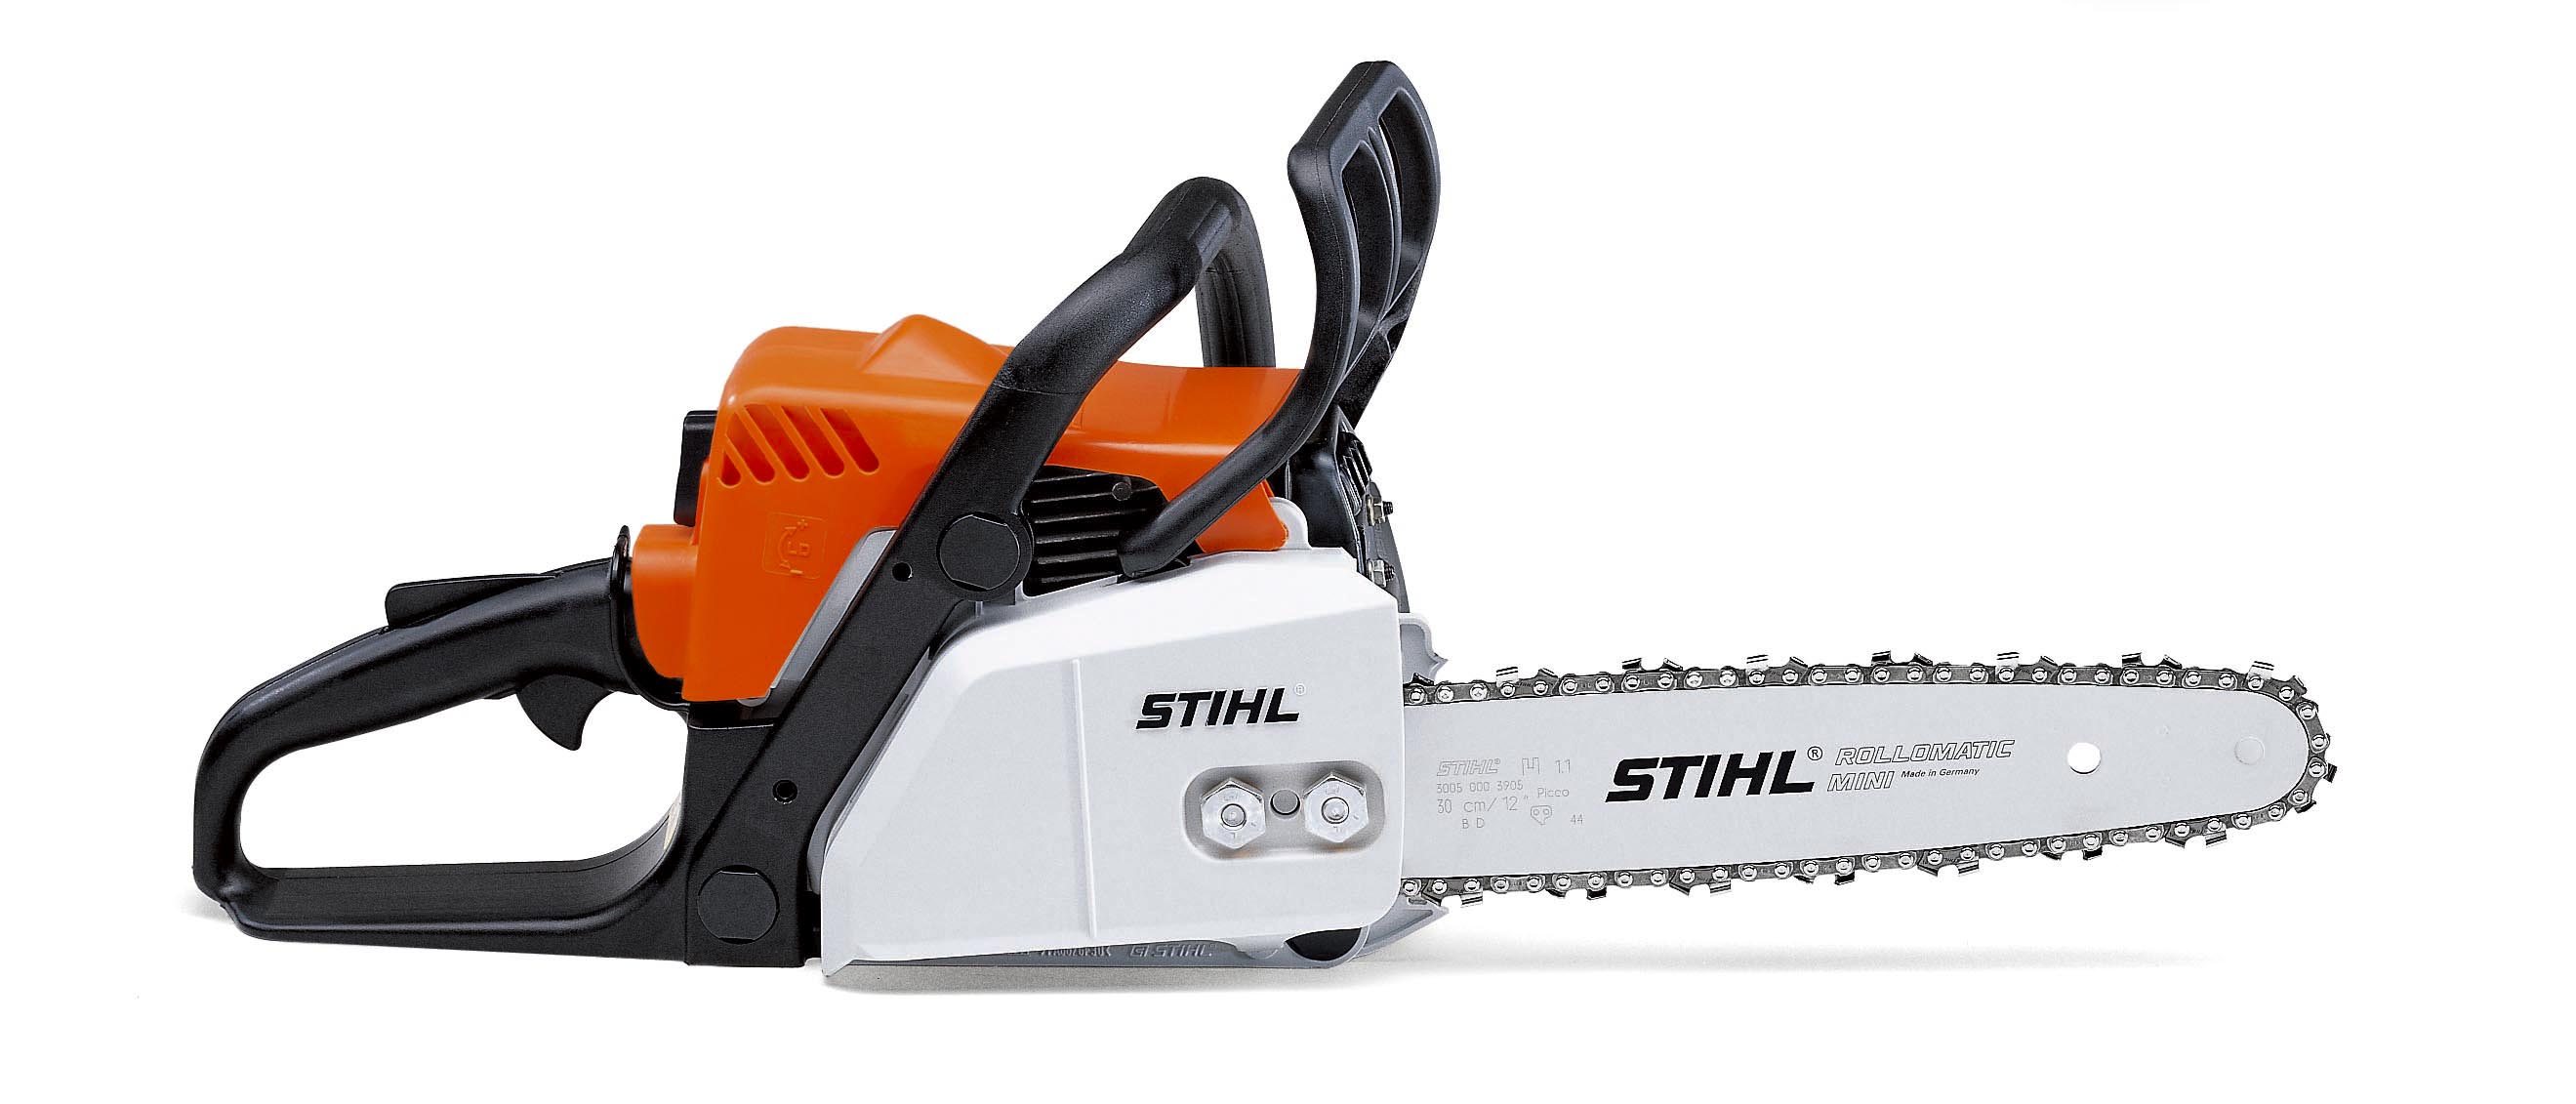 Stihl Ms Benznl Testere HD Walls Find Wallpapers